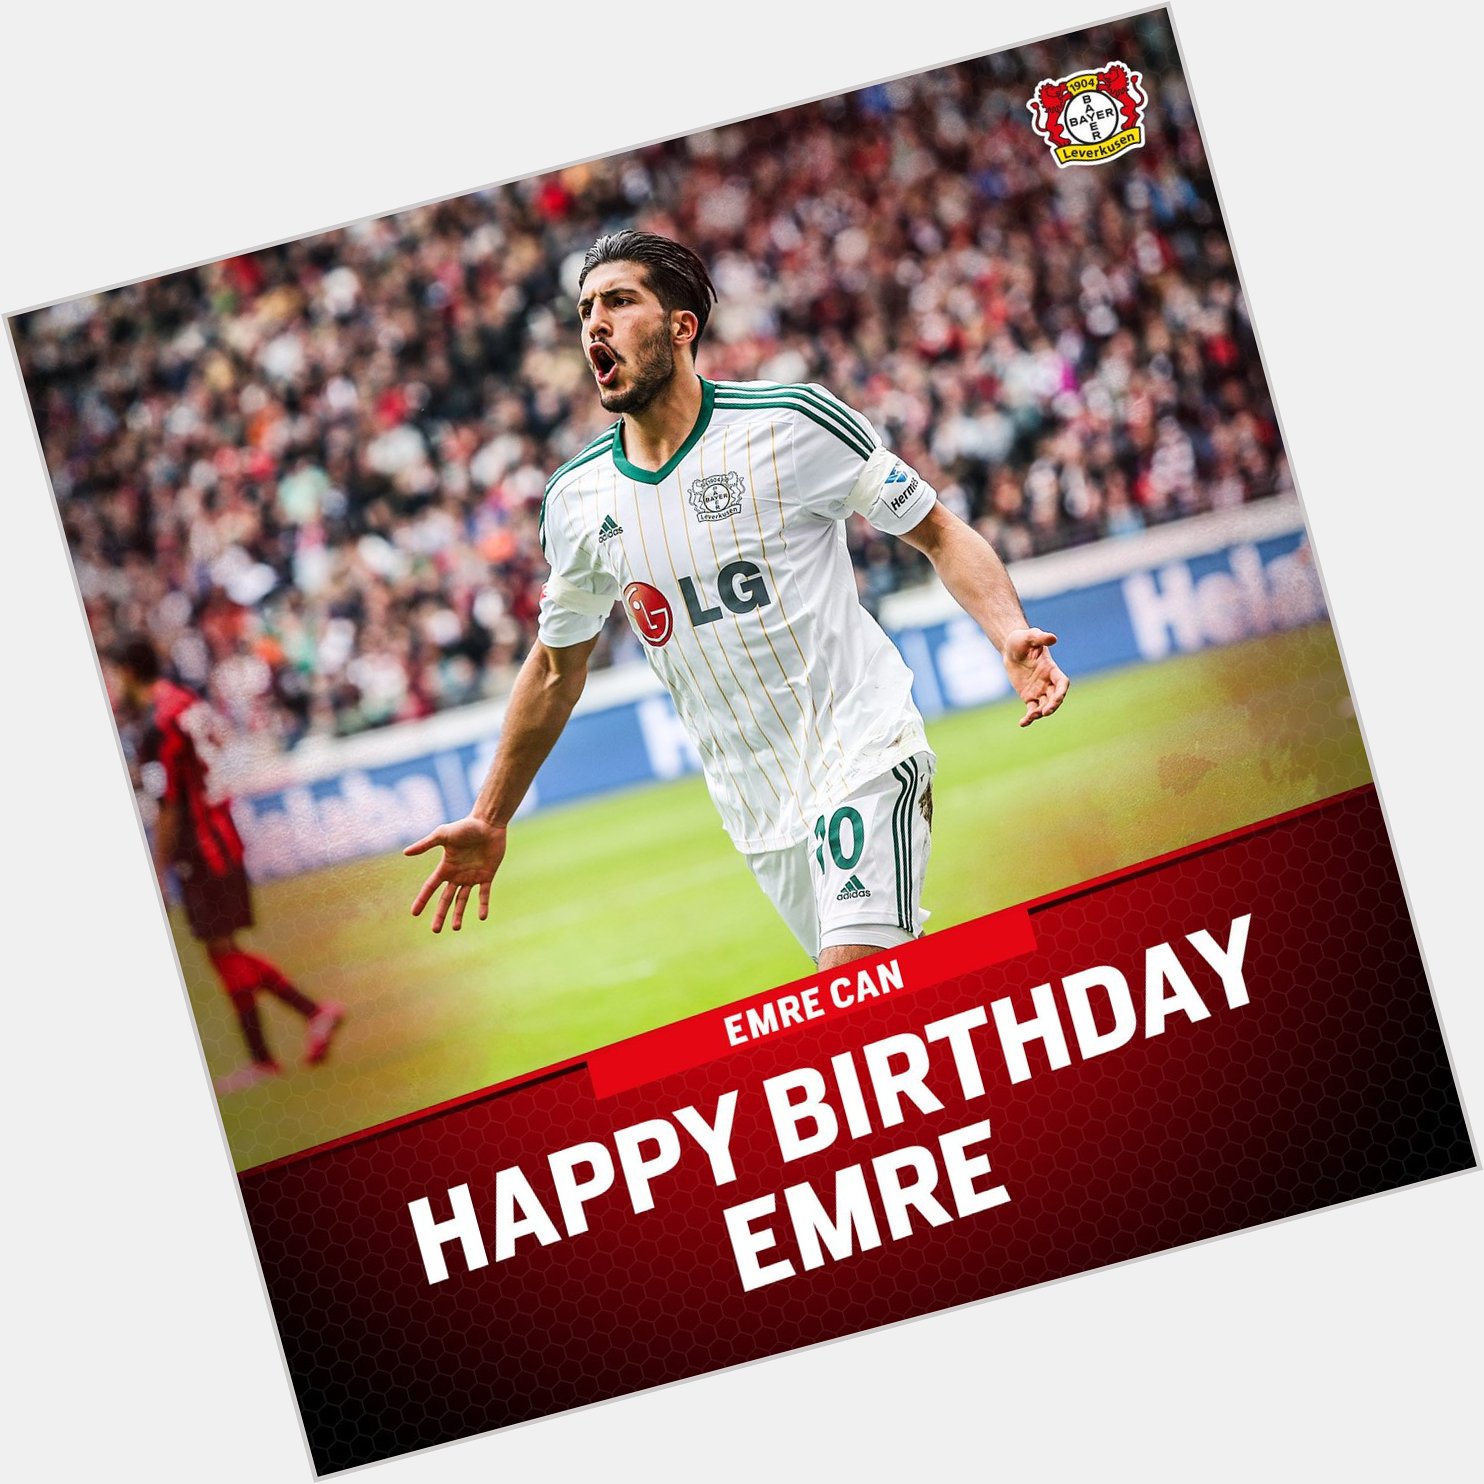 He\s played for both sides of We\re wishing a very happy birthday to former   Emre Can! 